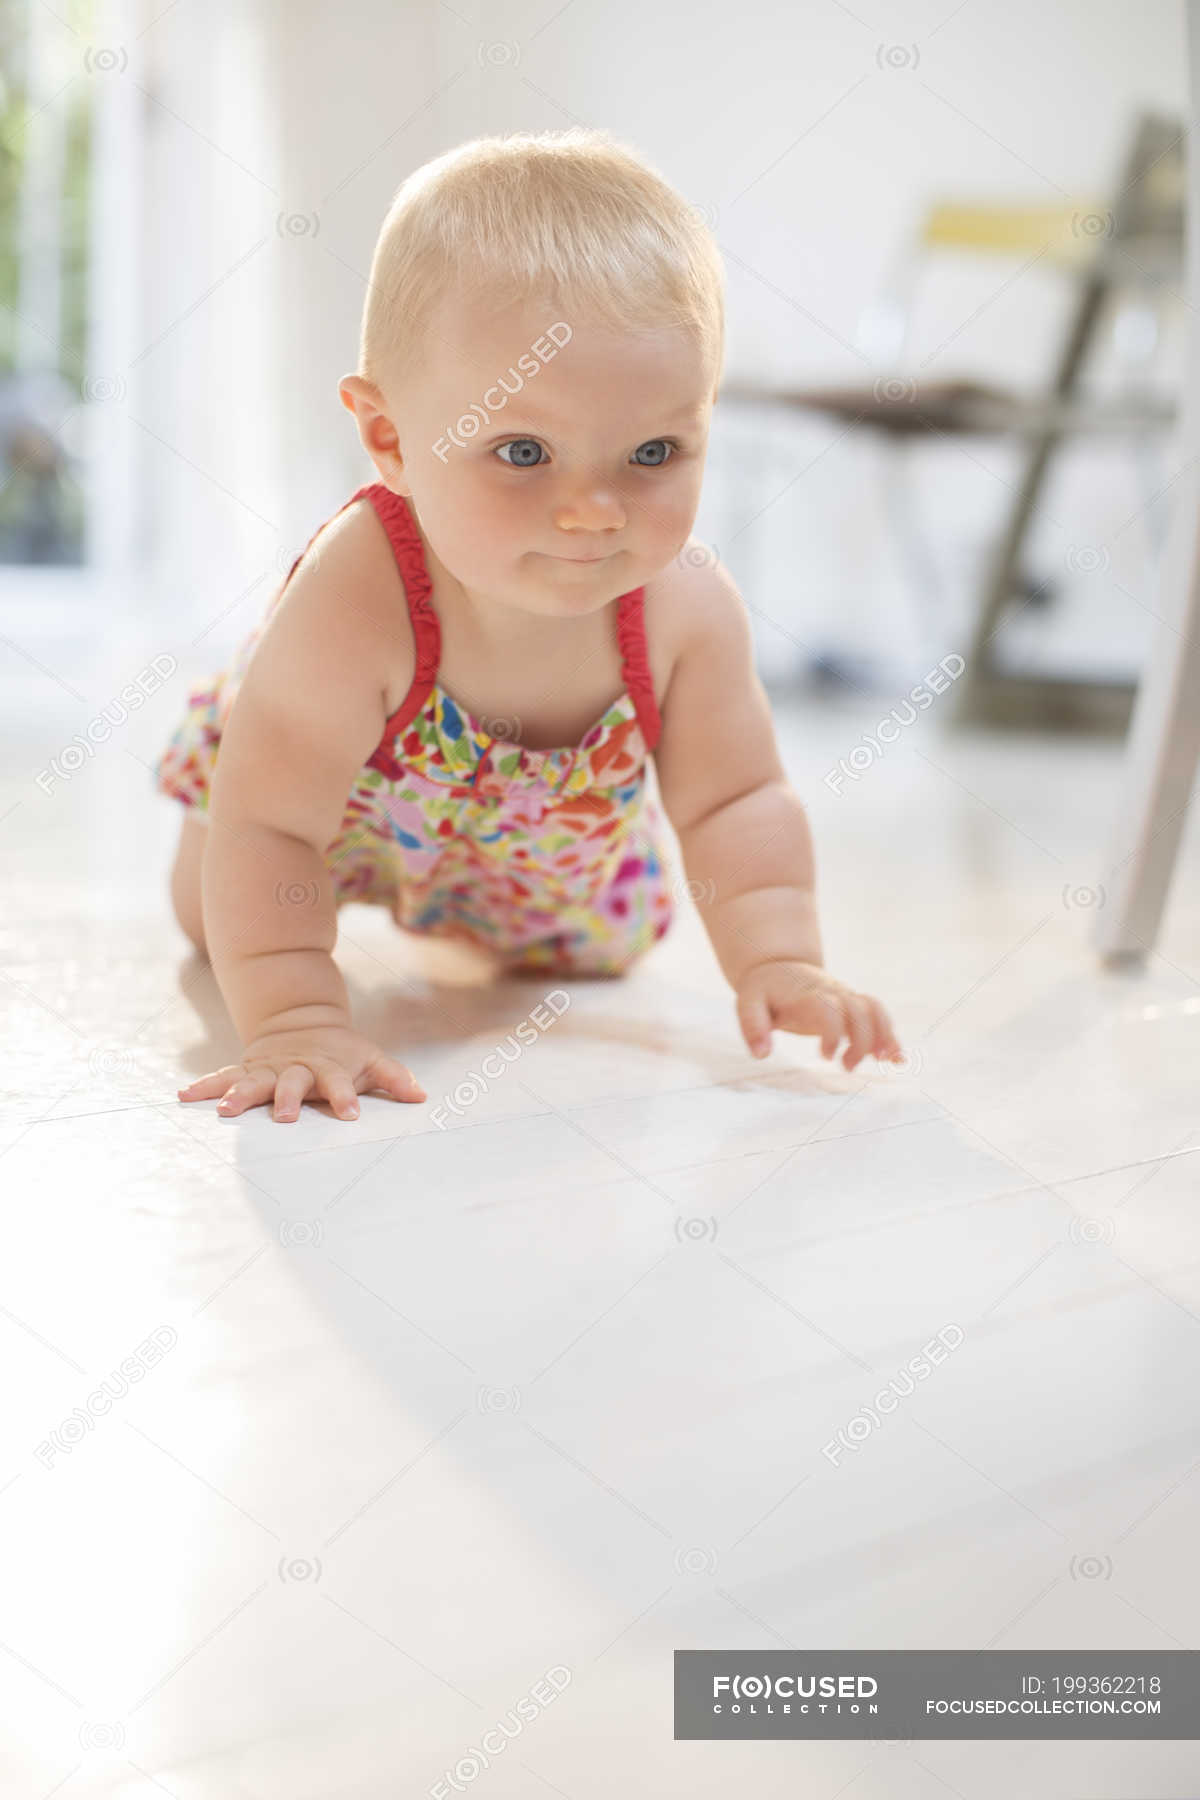 Baby Girl Crawling On Floor Focus On Foreground Three Quarter